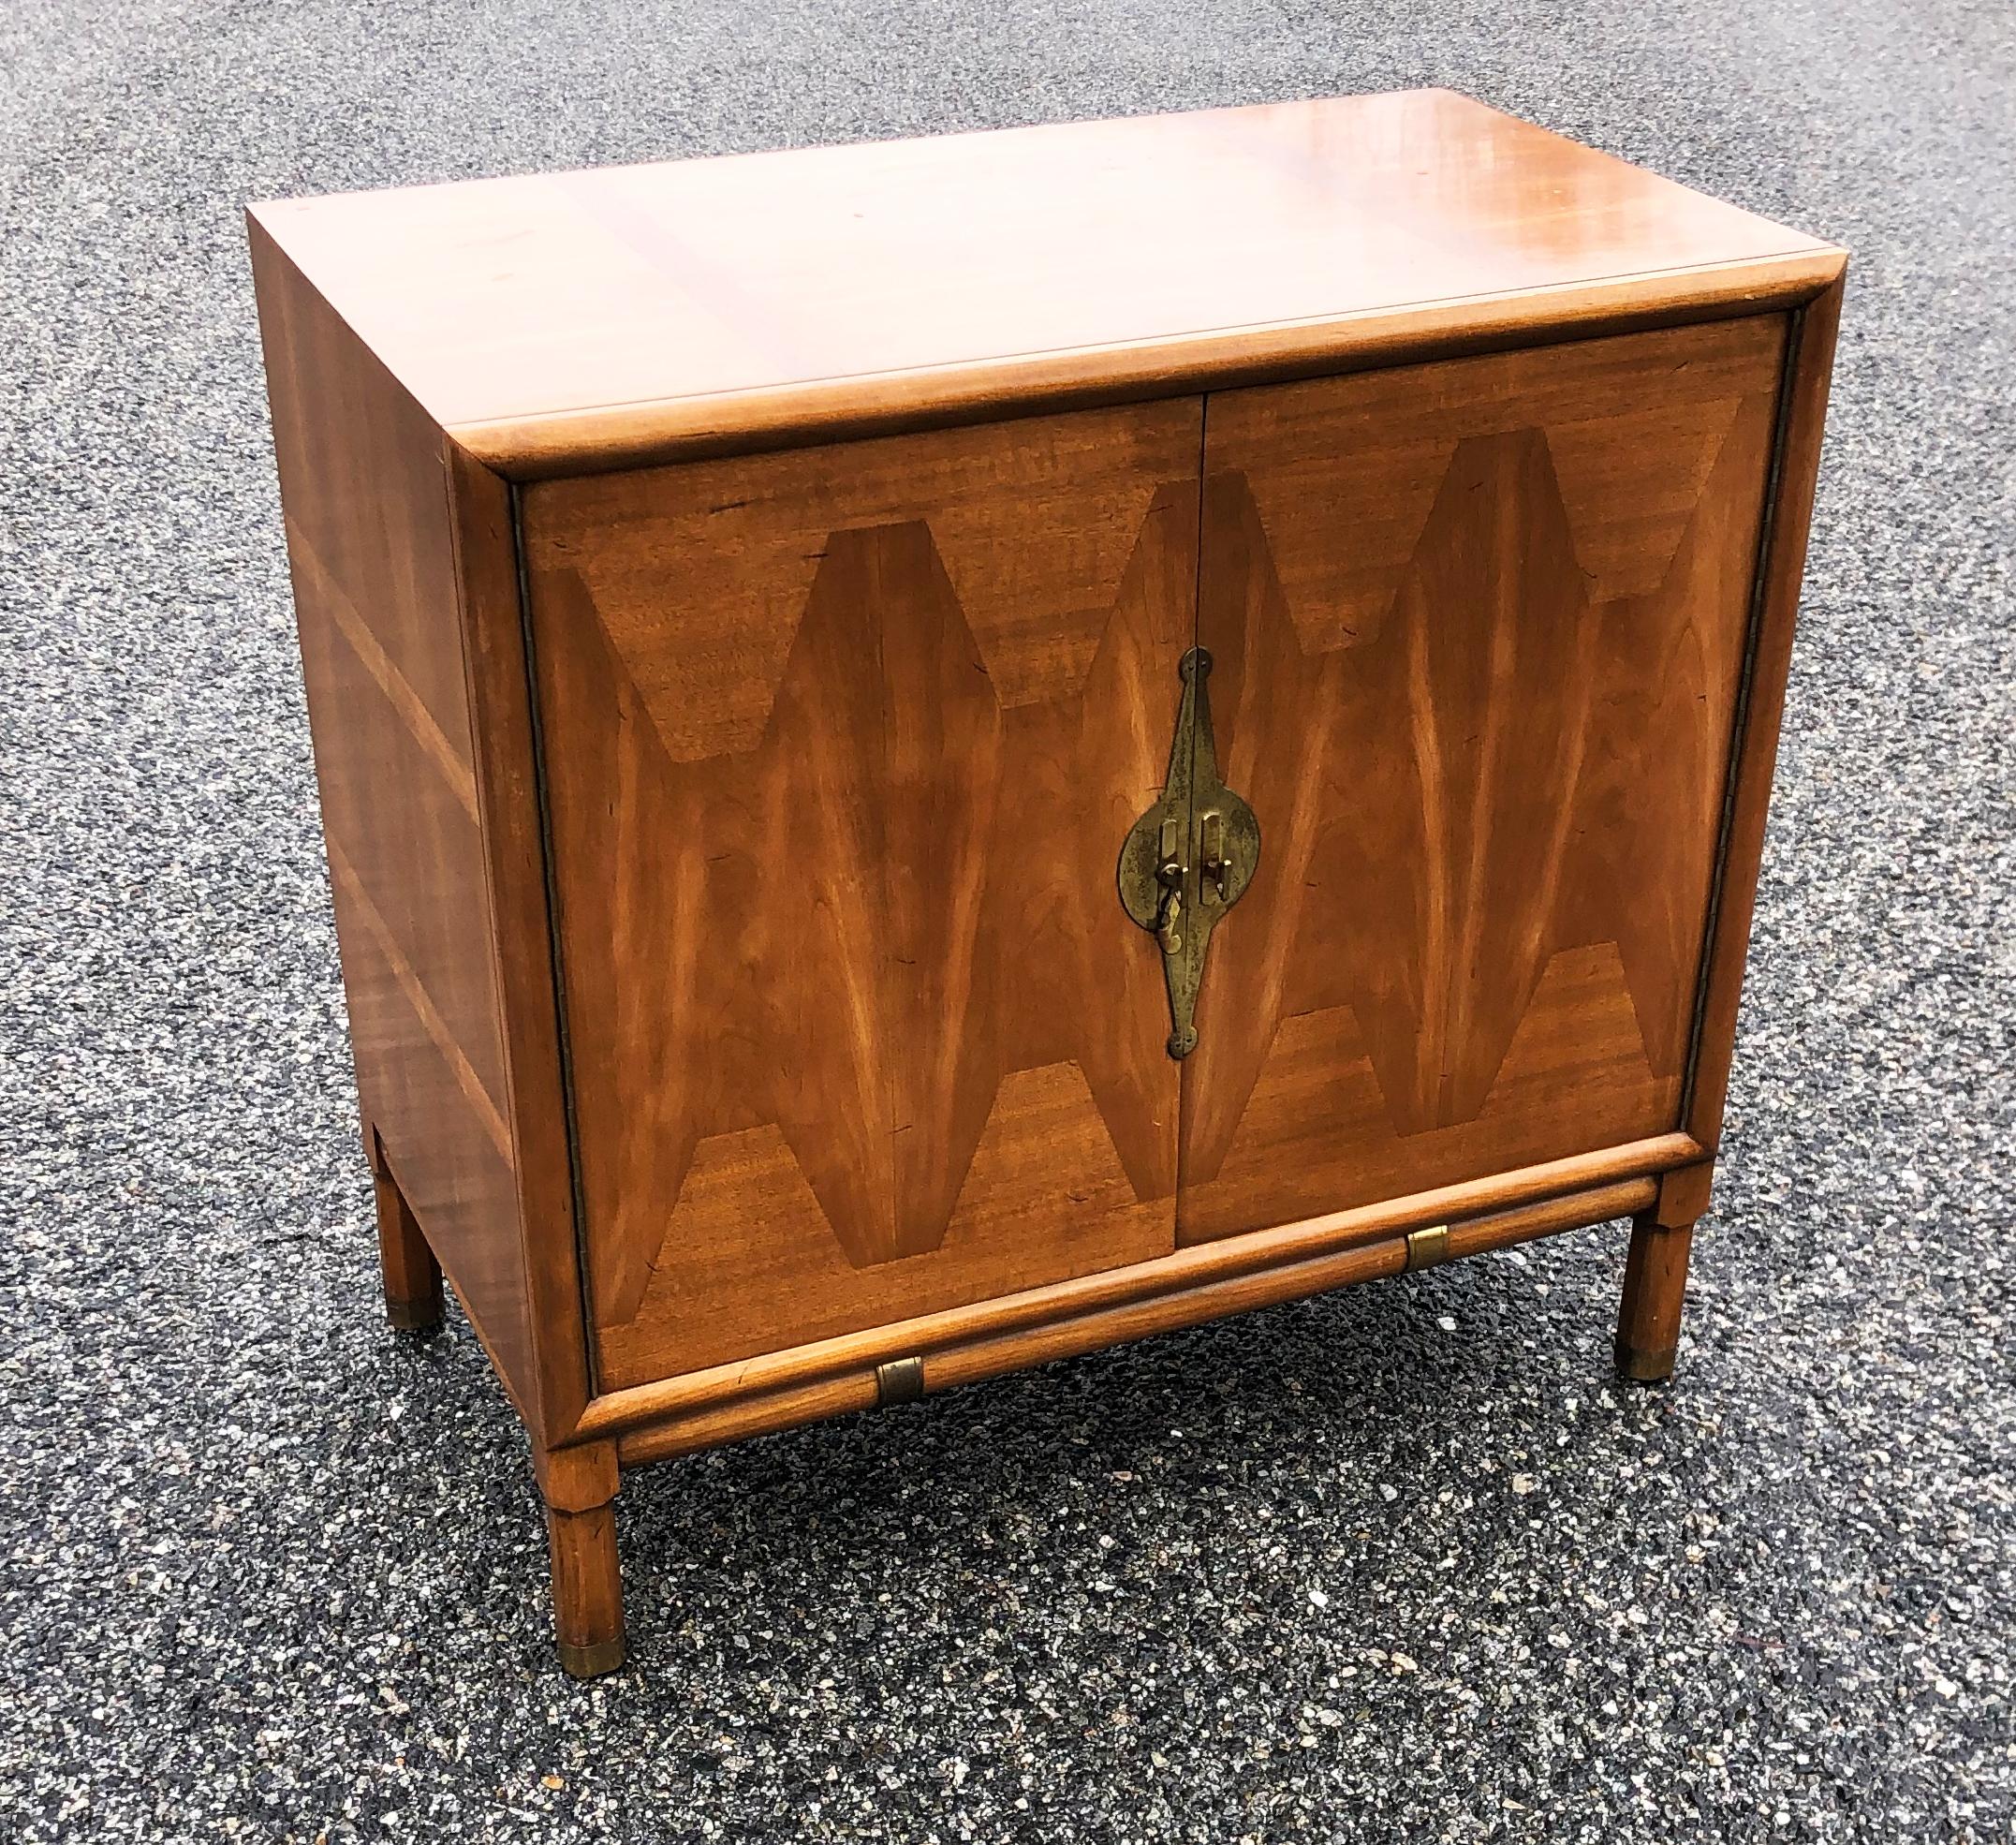 This incredible midcentury Classic is a true work of art the marquetry is exquisite the Chinese inspired brass lock and details are gorgeous and every aspect of this piece of furniture is incredible. Though I am attributing this cabinet to Renzo